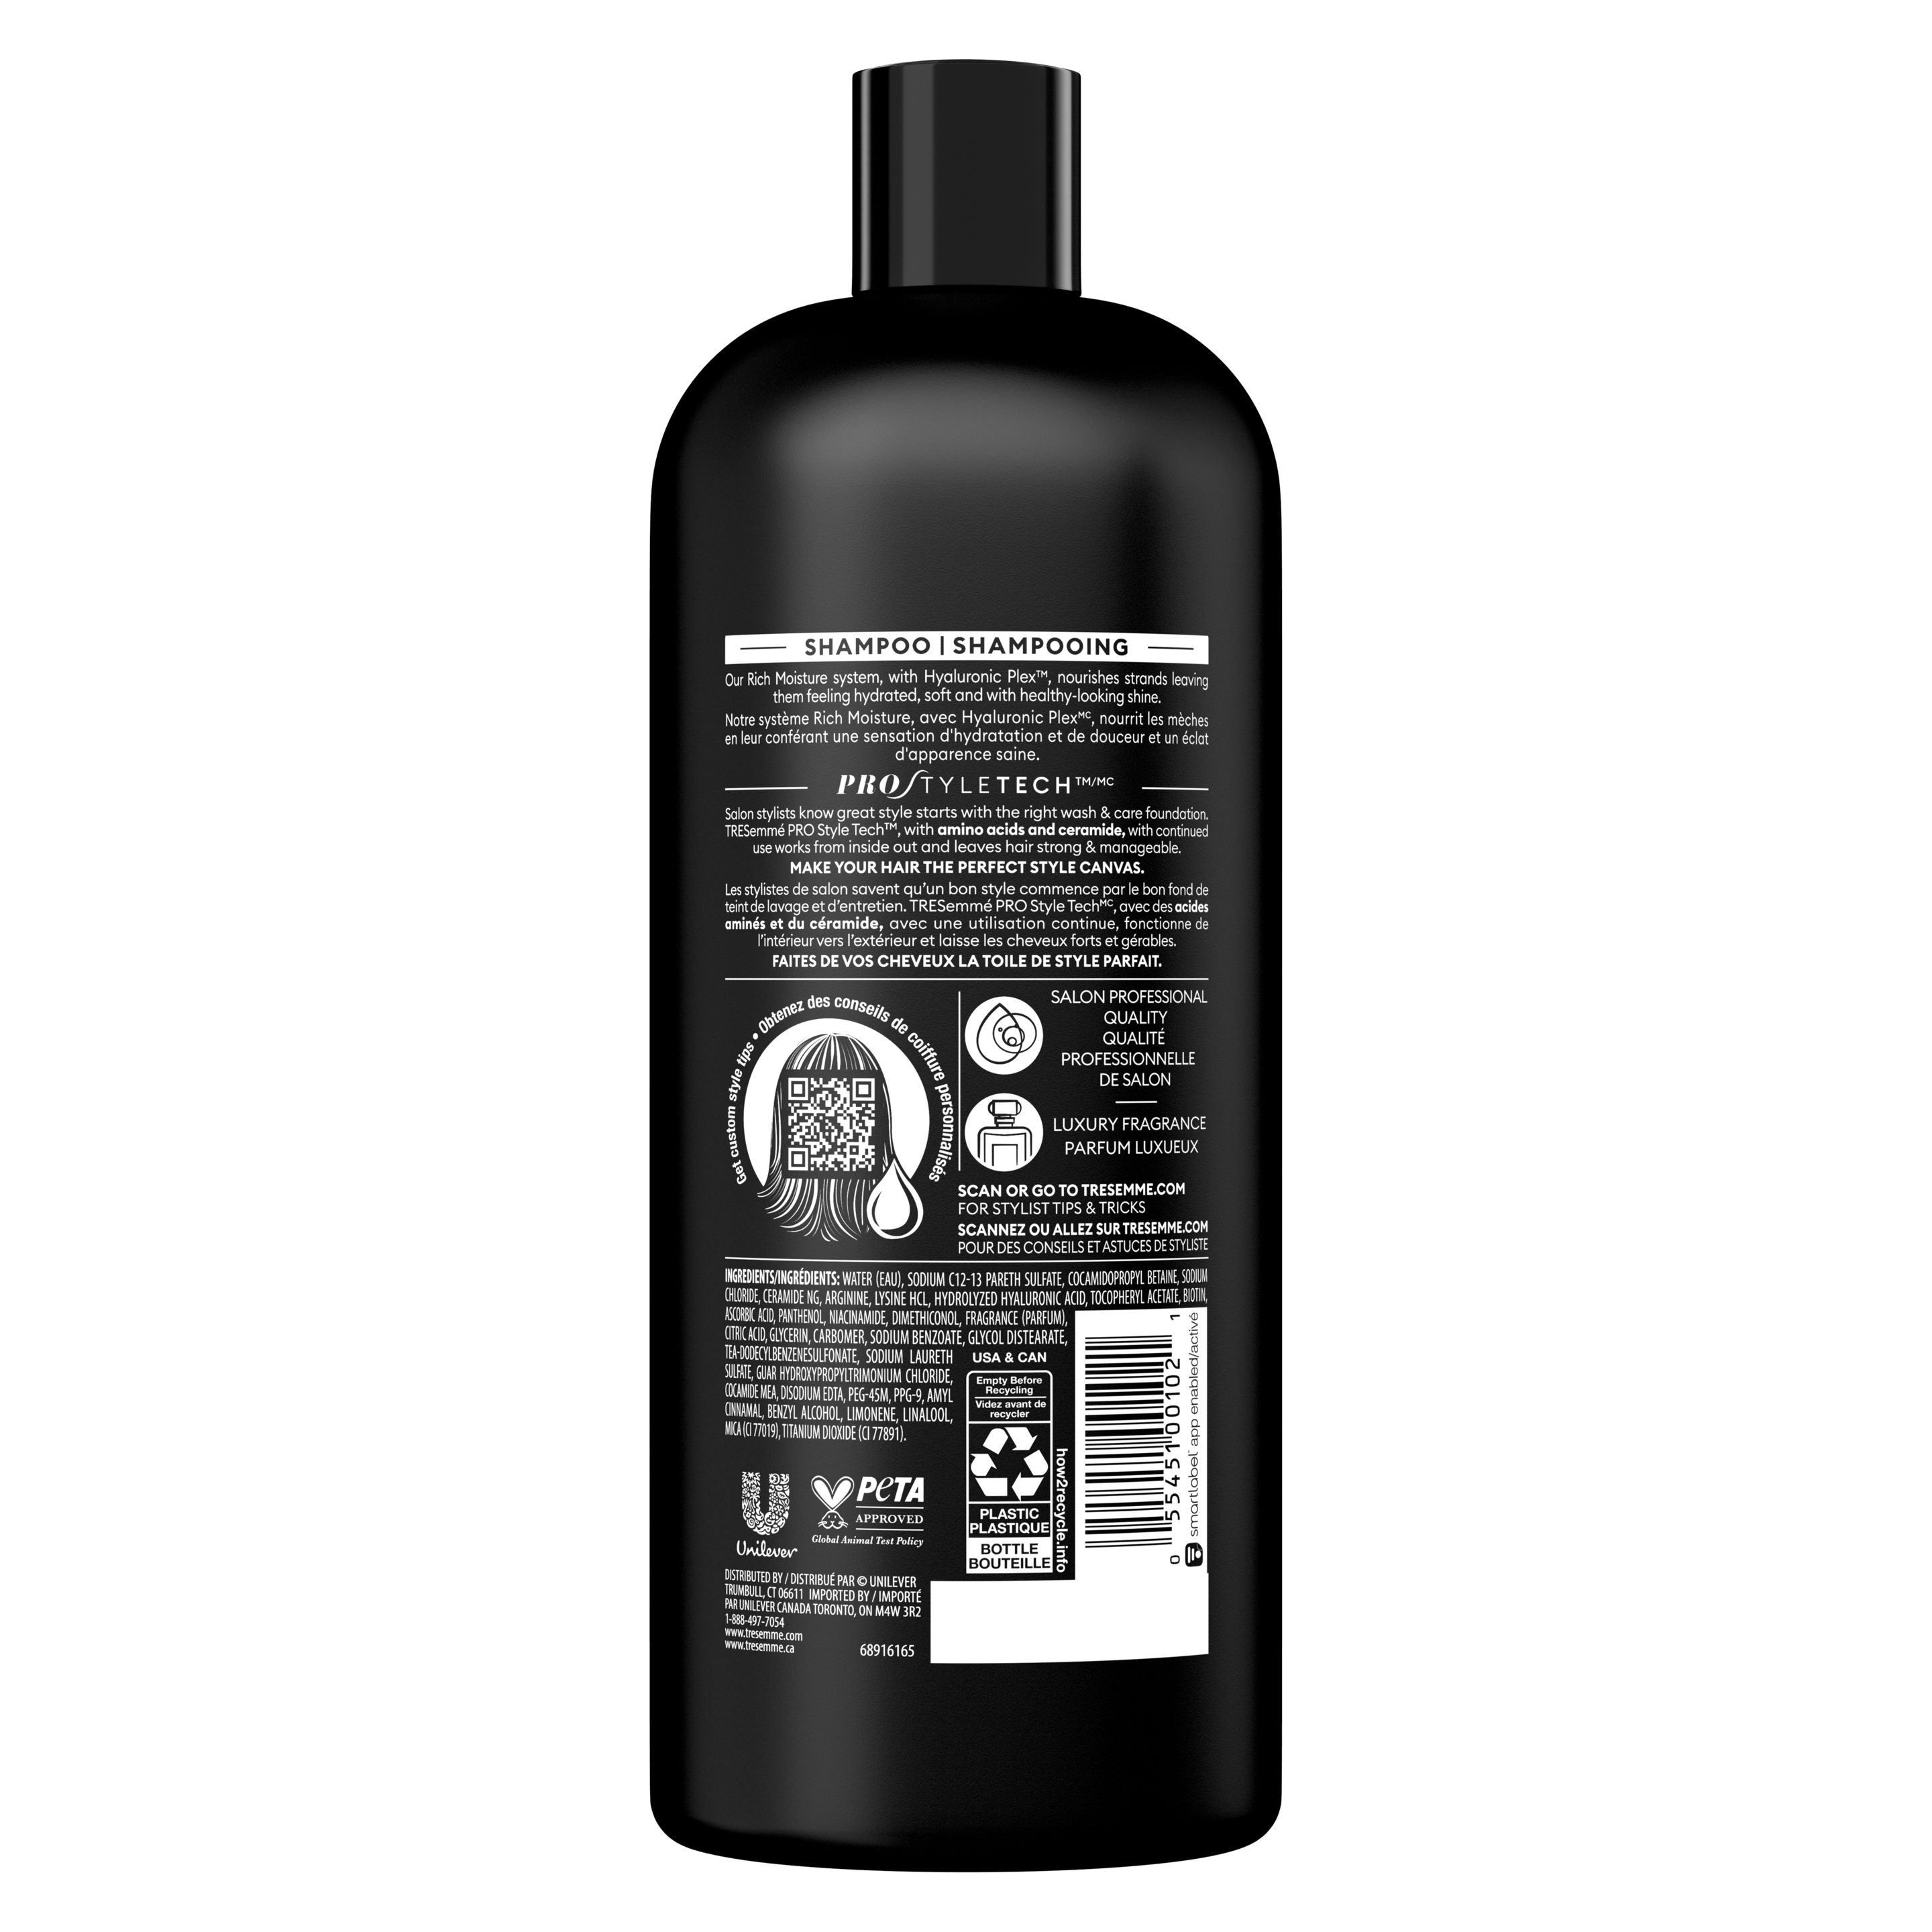 TRESemmé  Twin Pack Shampoo & Conditioner for dry hair Rich Moisture formulated with Pro Style Tech 828 ml 2 Bundle Pack